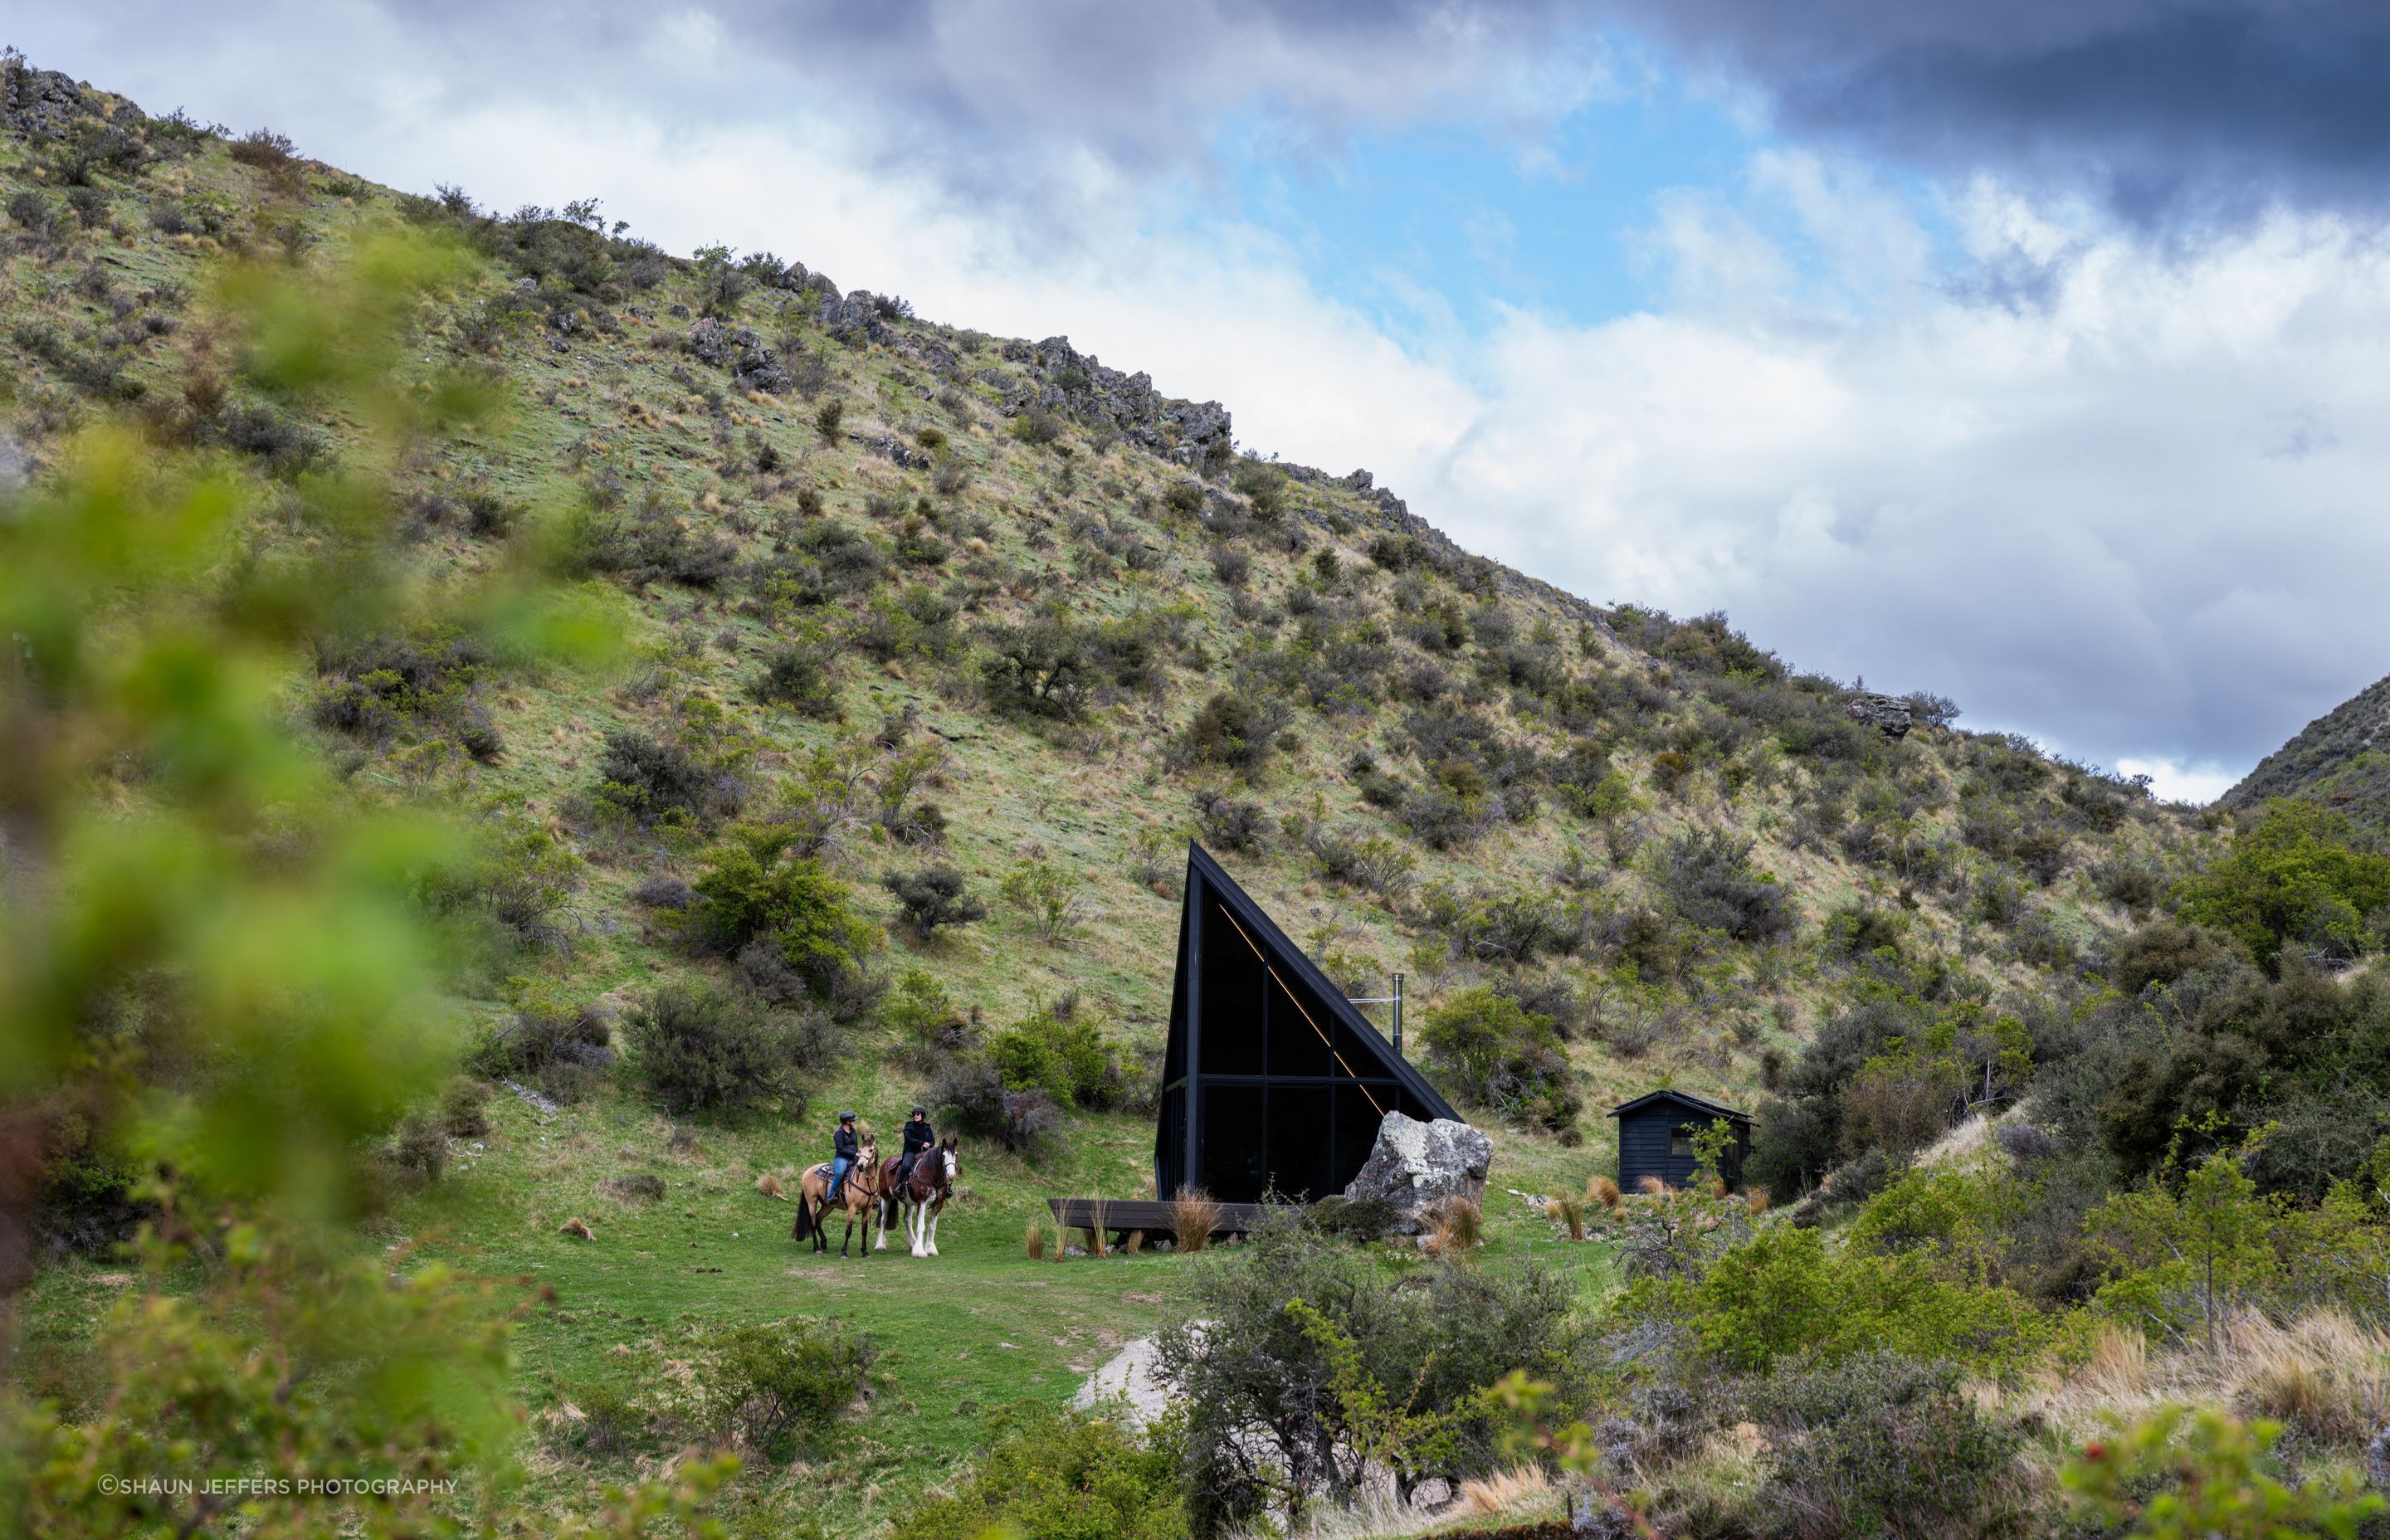 The Black Diamond was designed to have a minimal impact on the site, achieved through the cabin's small footprint.